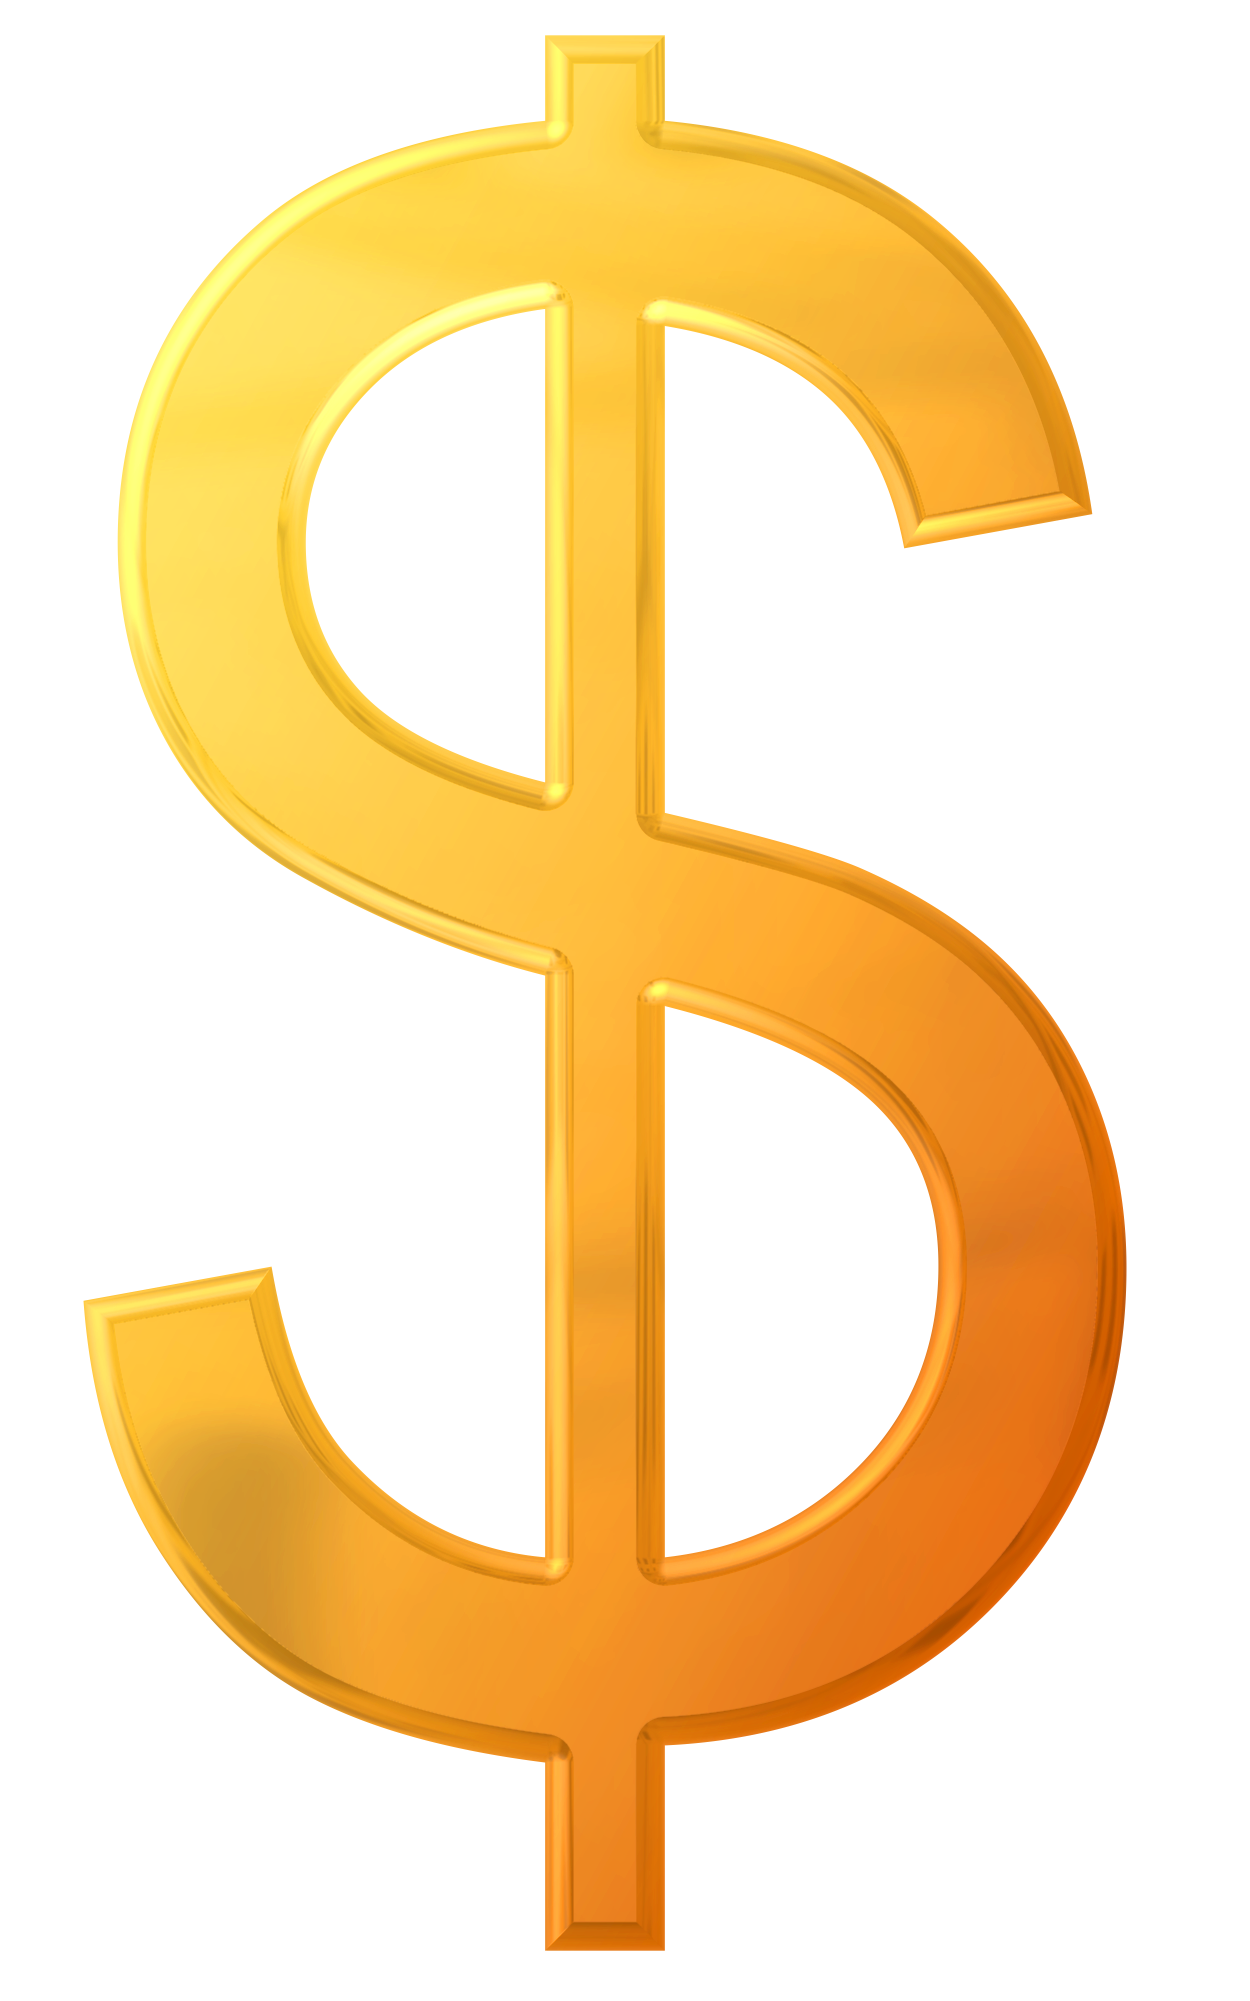 States United Dollar Sign HD Image Free PNG PNG Image